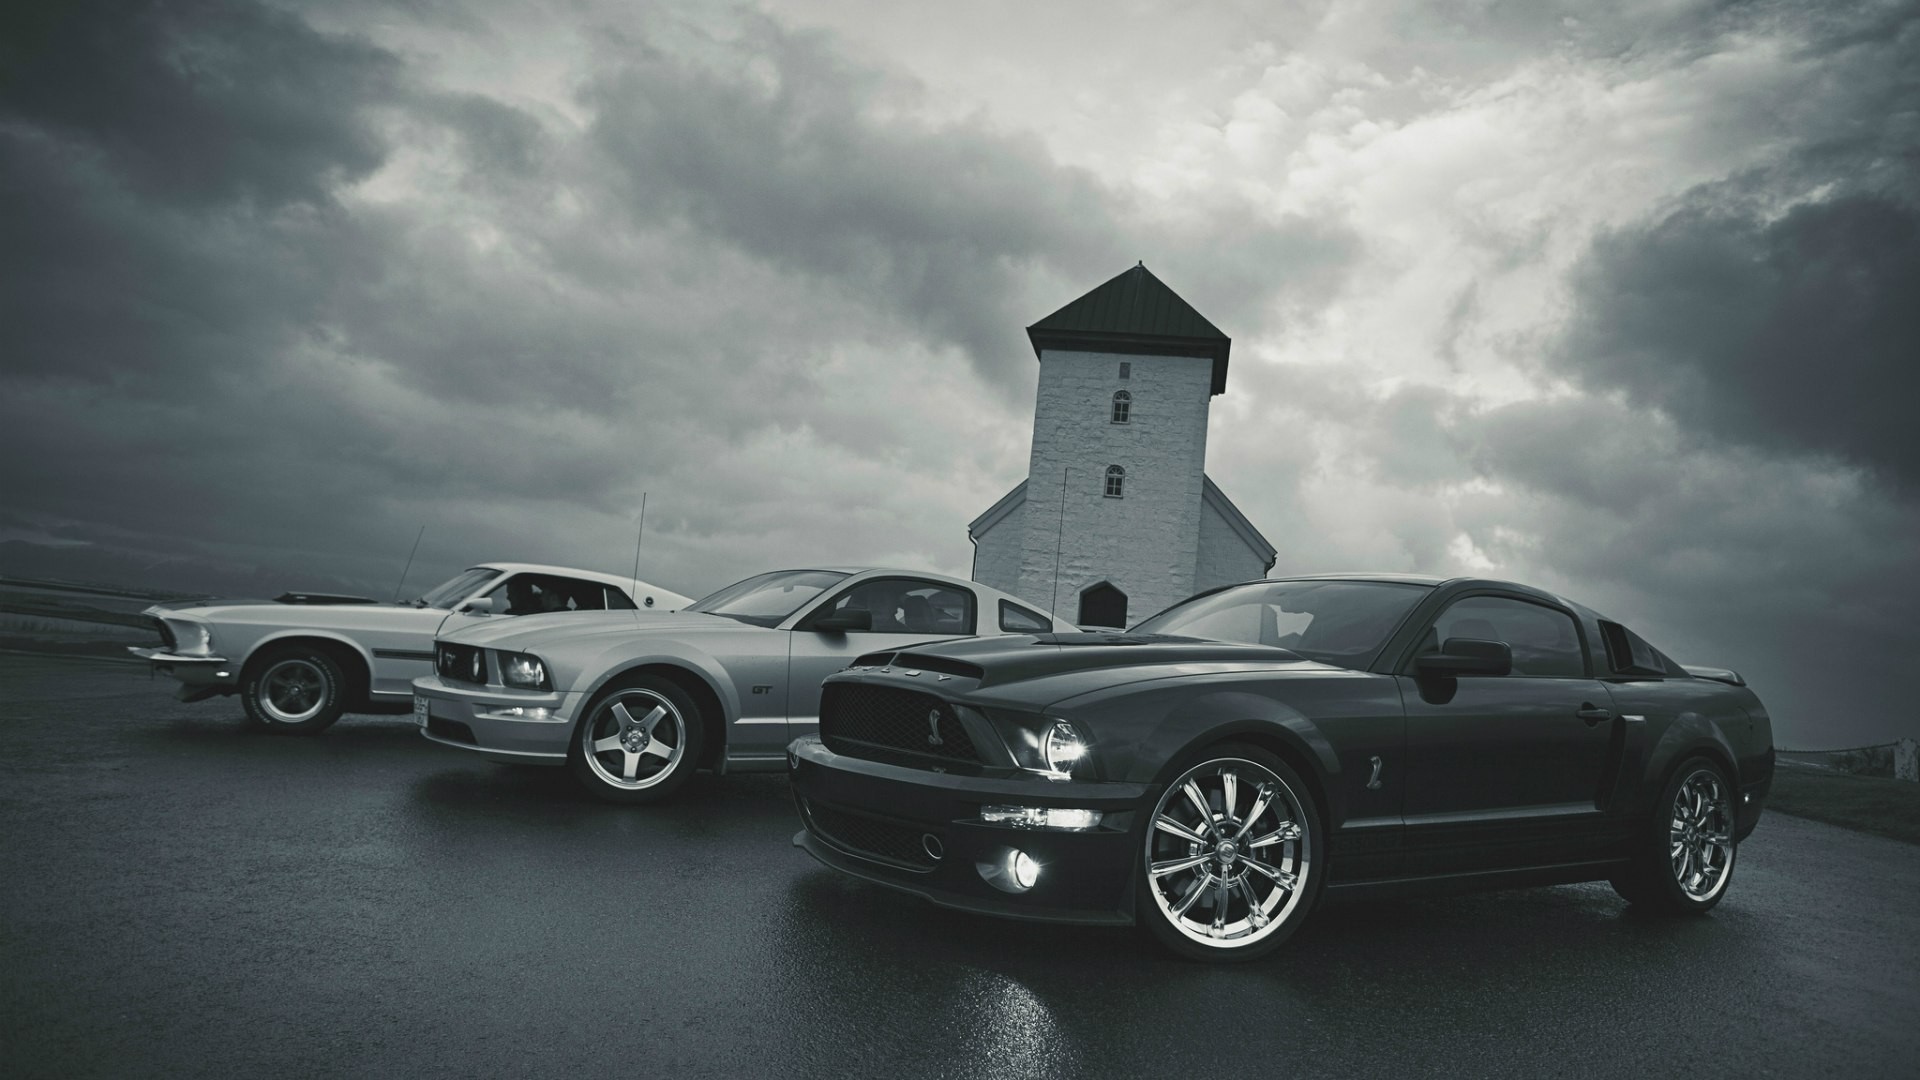 1920x1080 Ford Mustang muscle classic wallpaper |  | 110682 | WallpaperUP